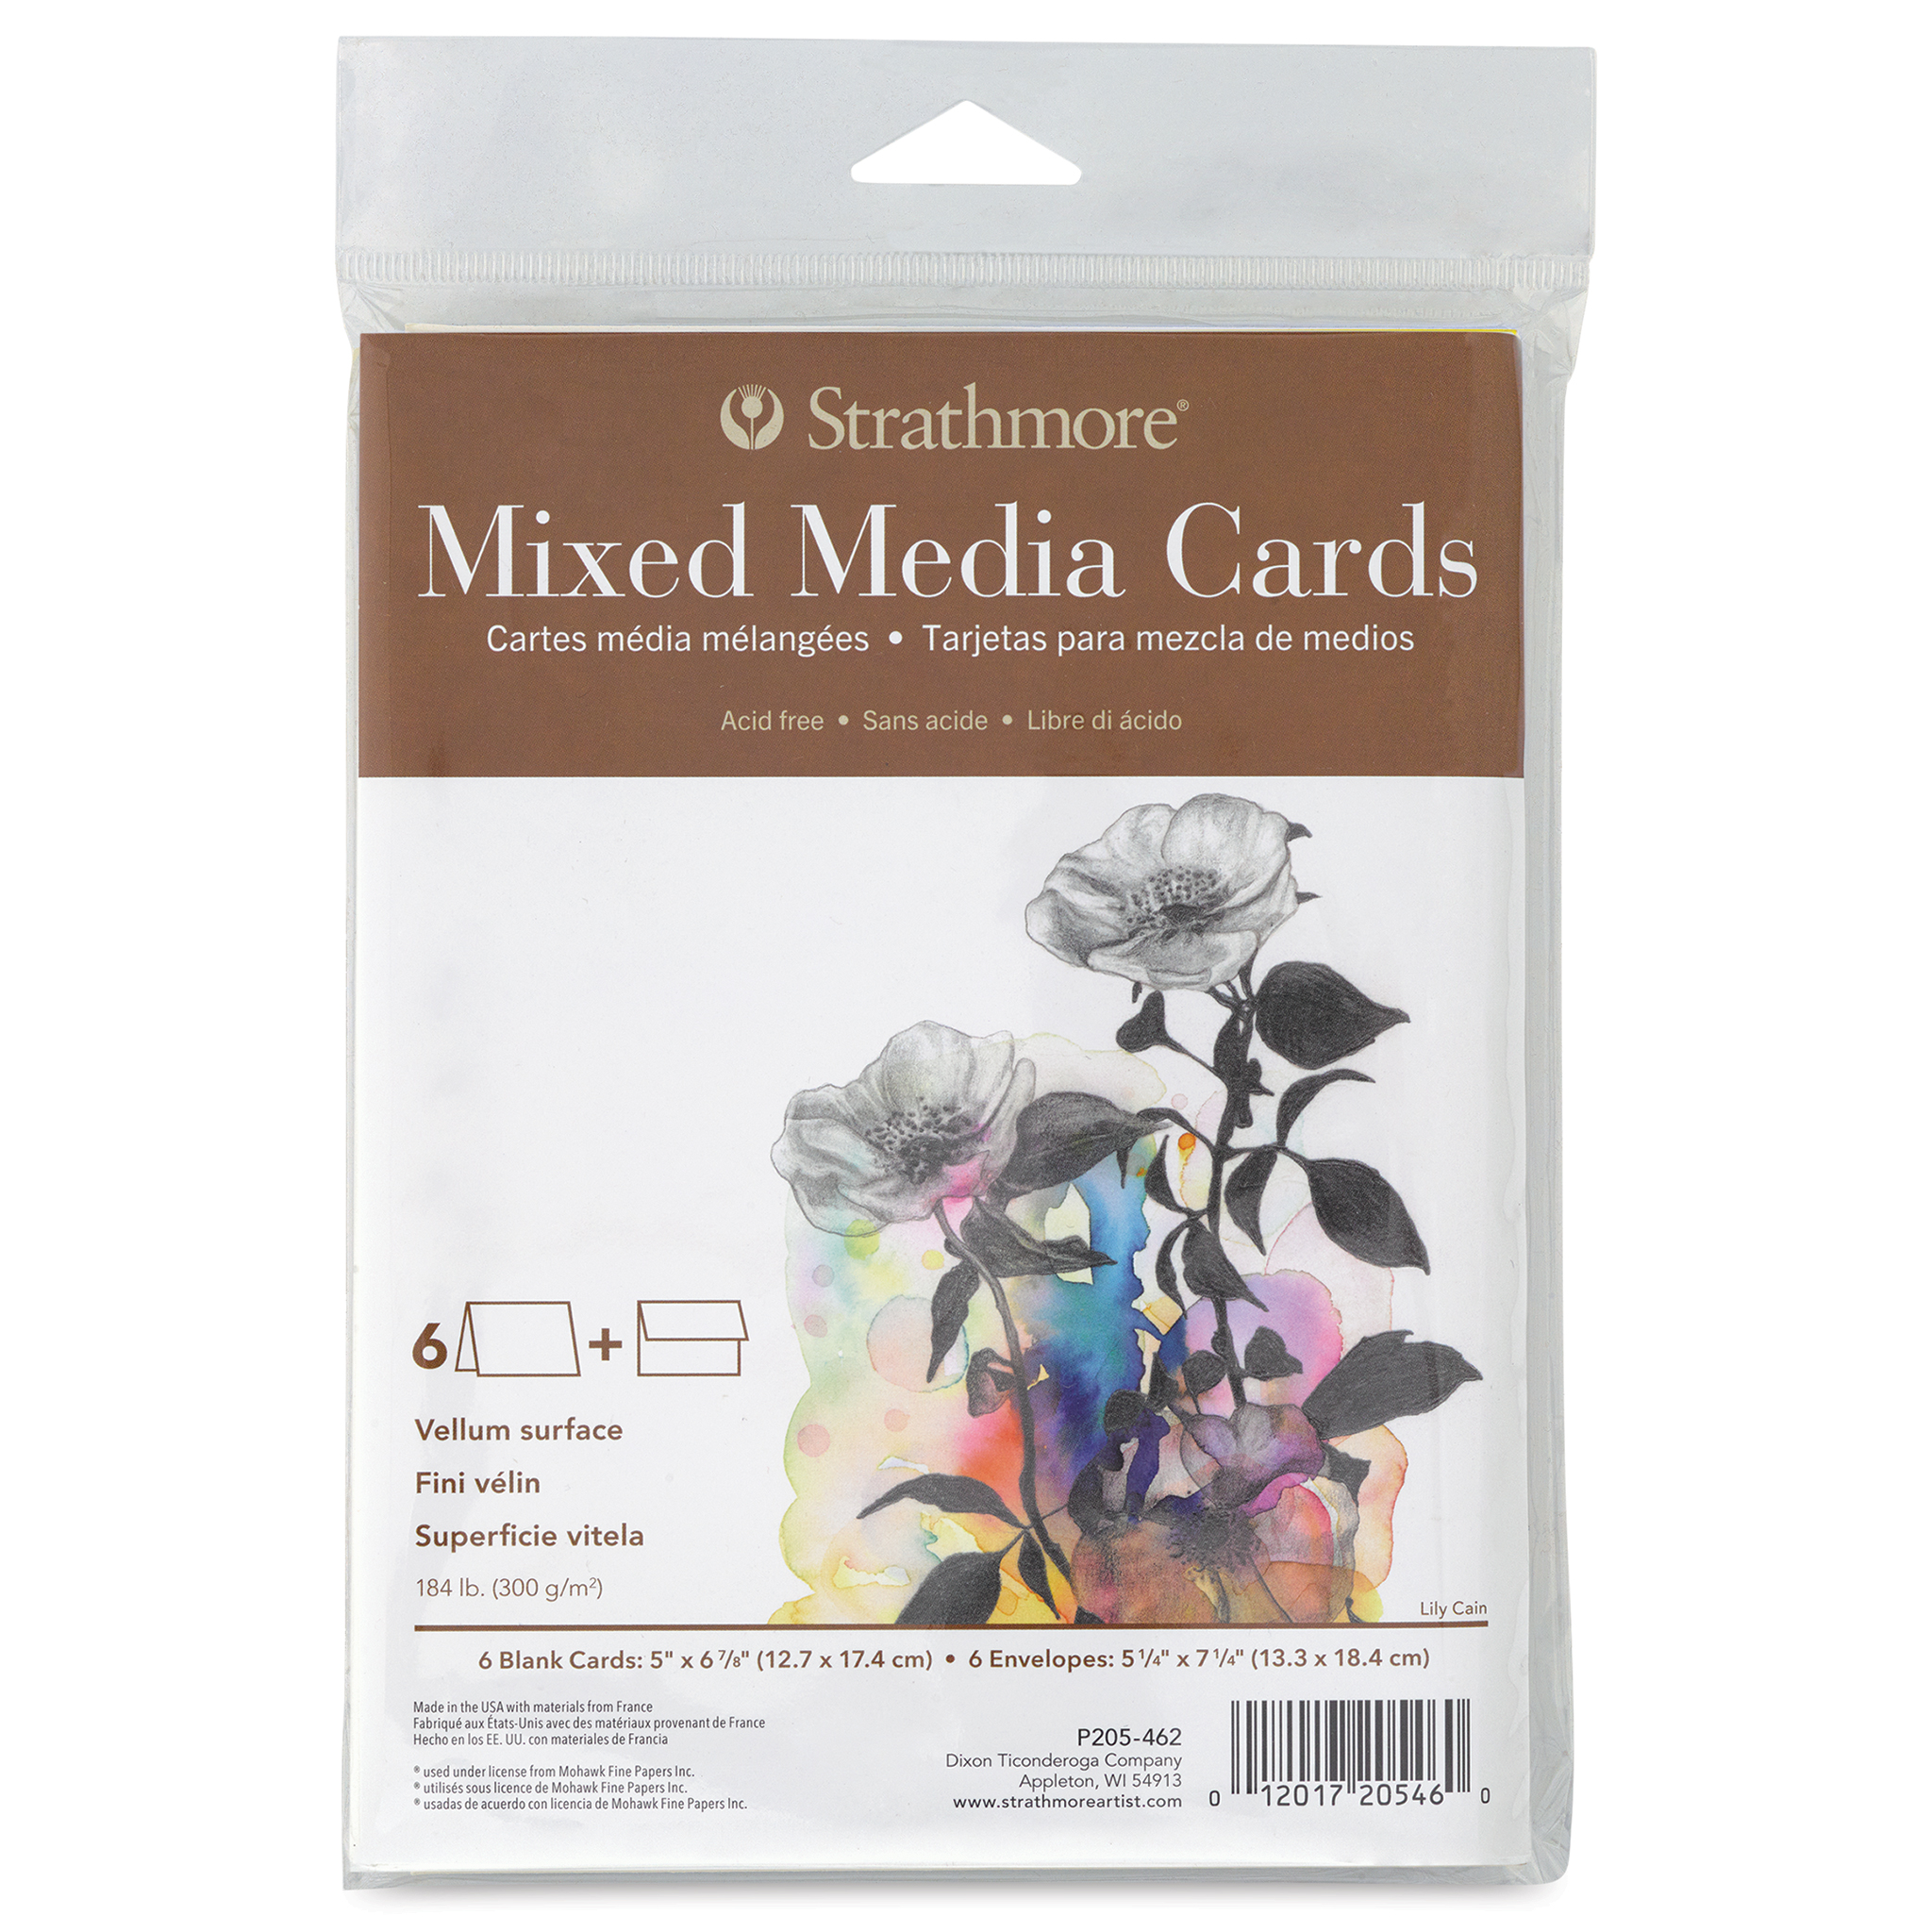 Strathmore Watercolor Cards and Envelopes